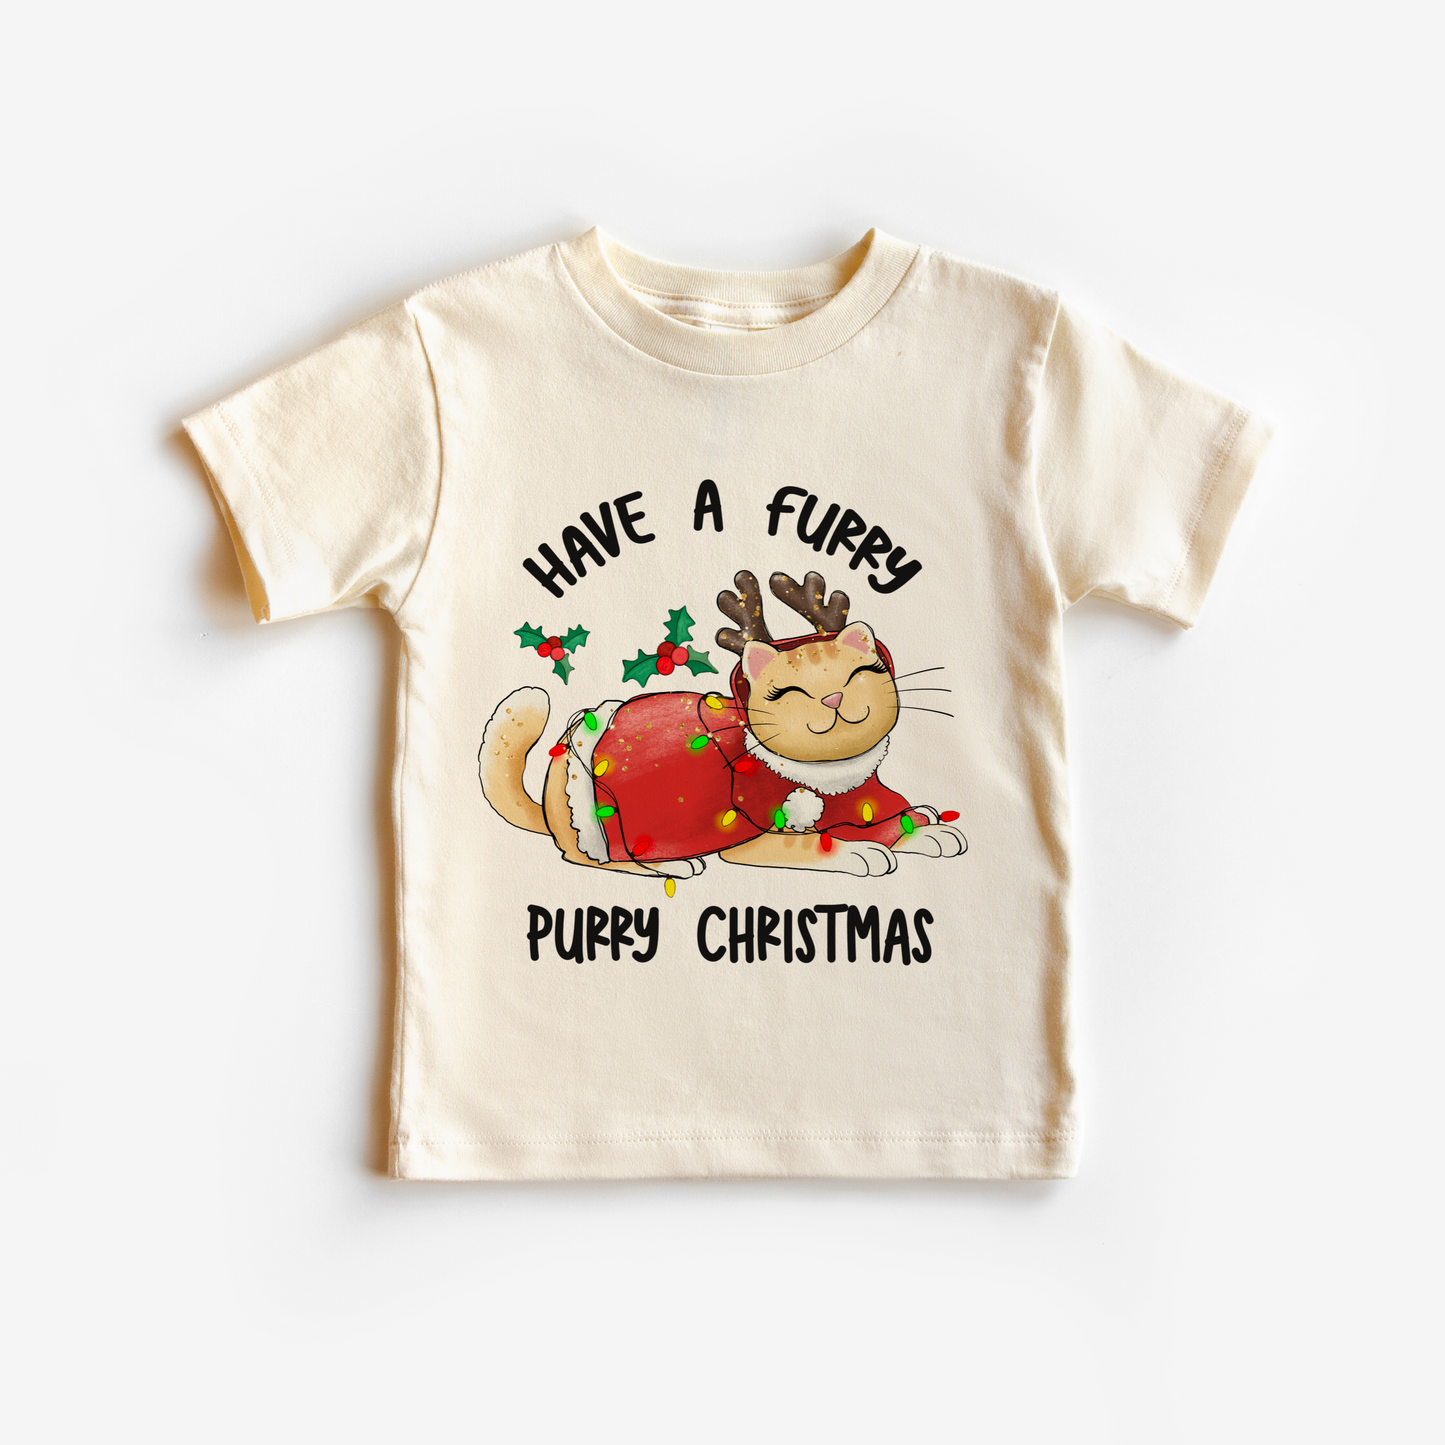 Furry Purry Cat Christmas t shirts for kids